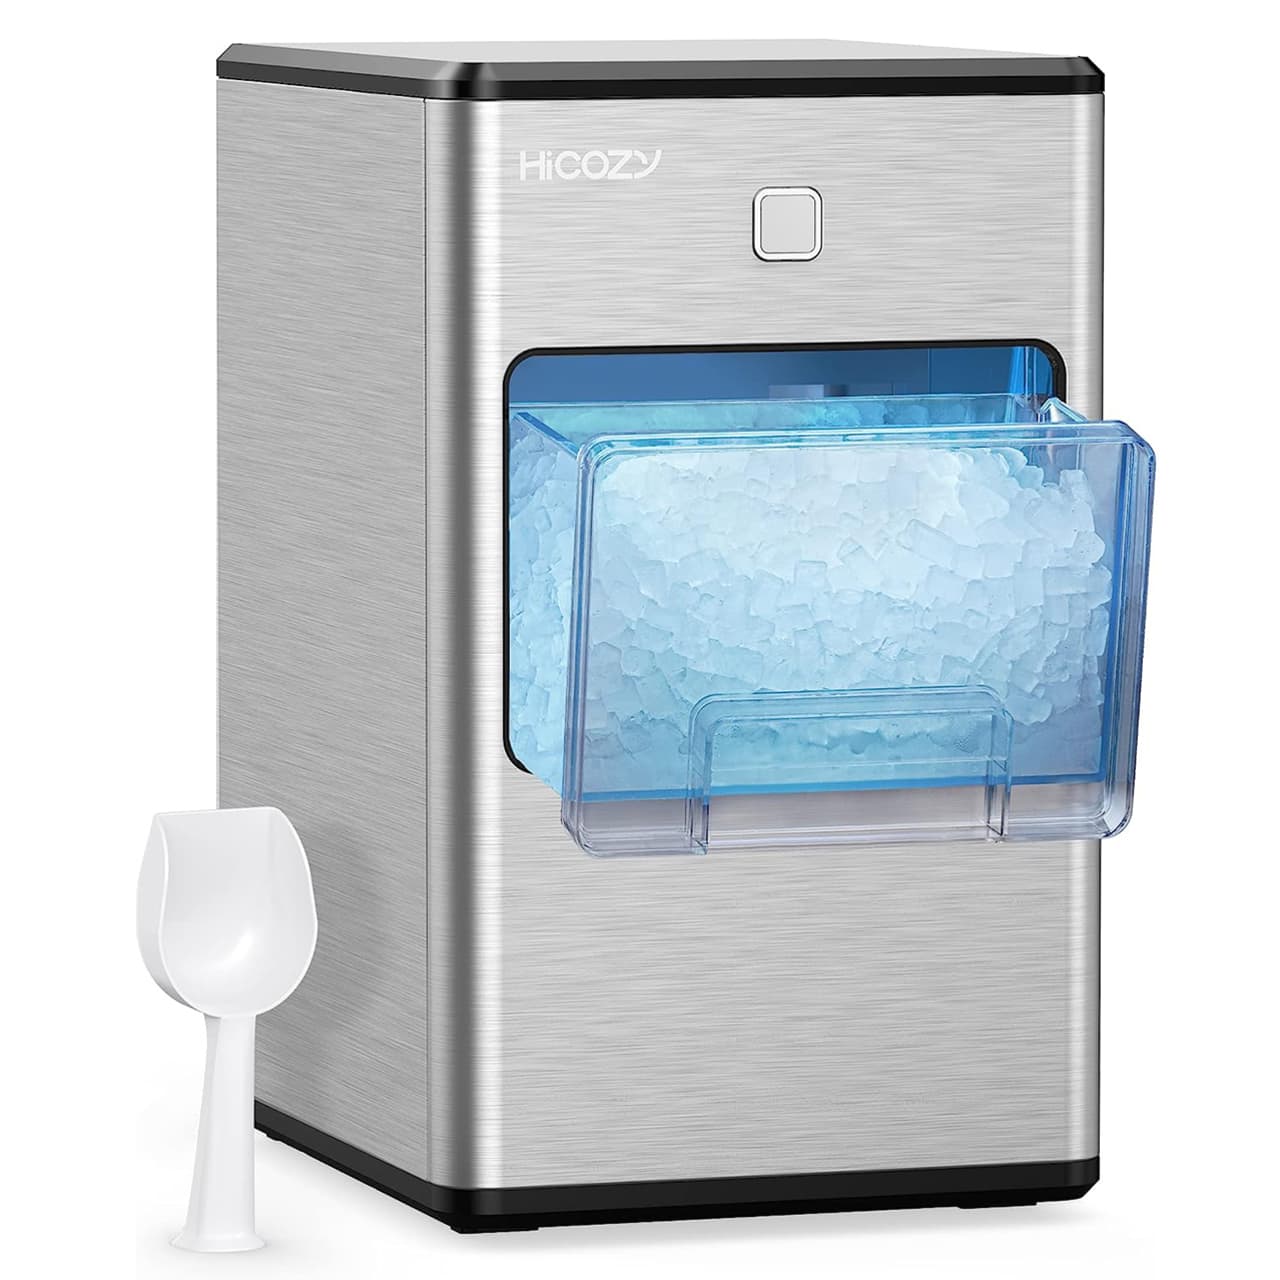 15+ Best Clear Ice Maker For Home Bar (2023)